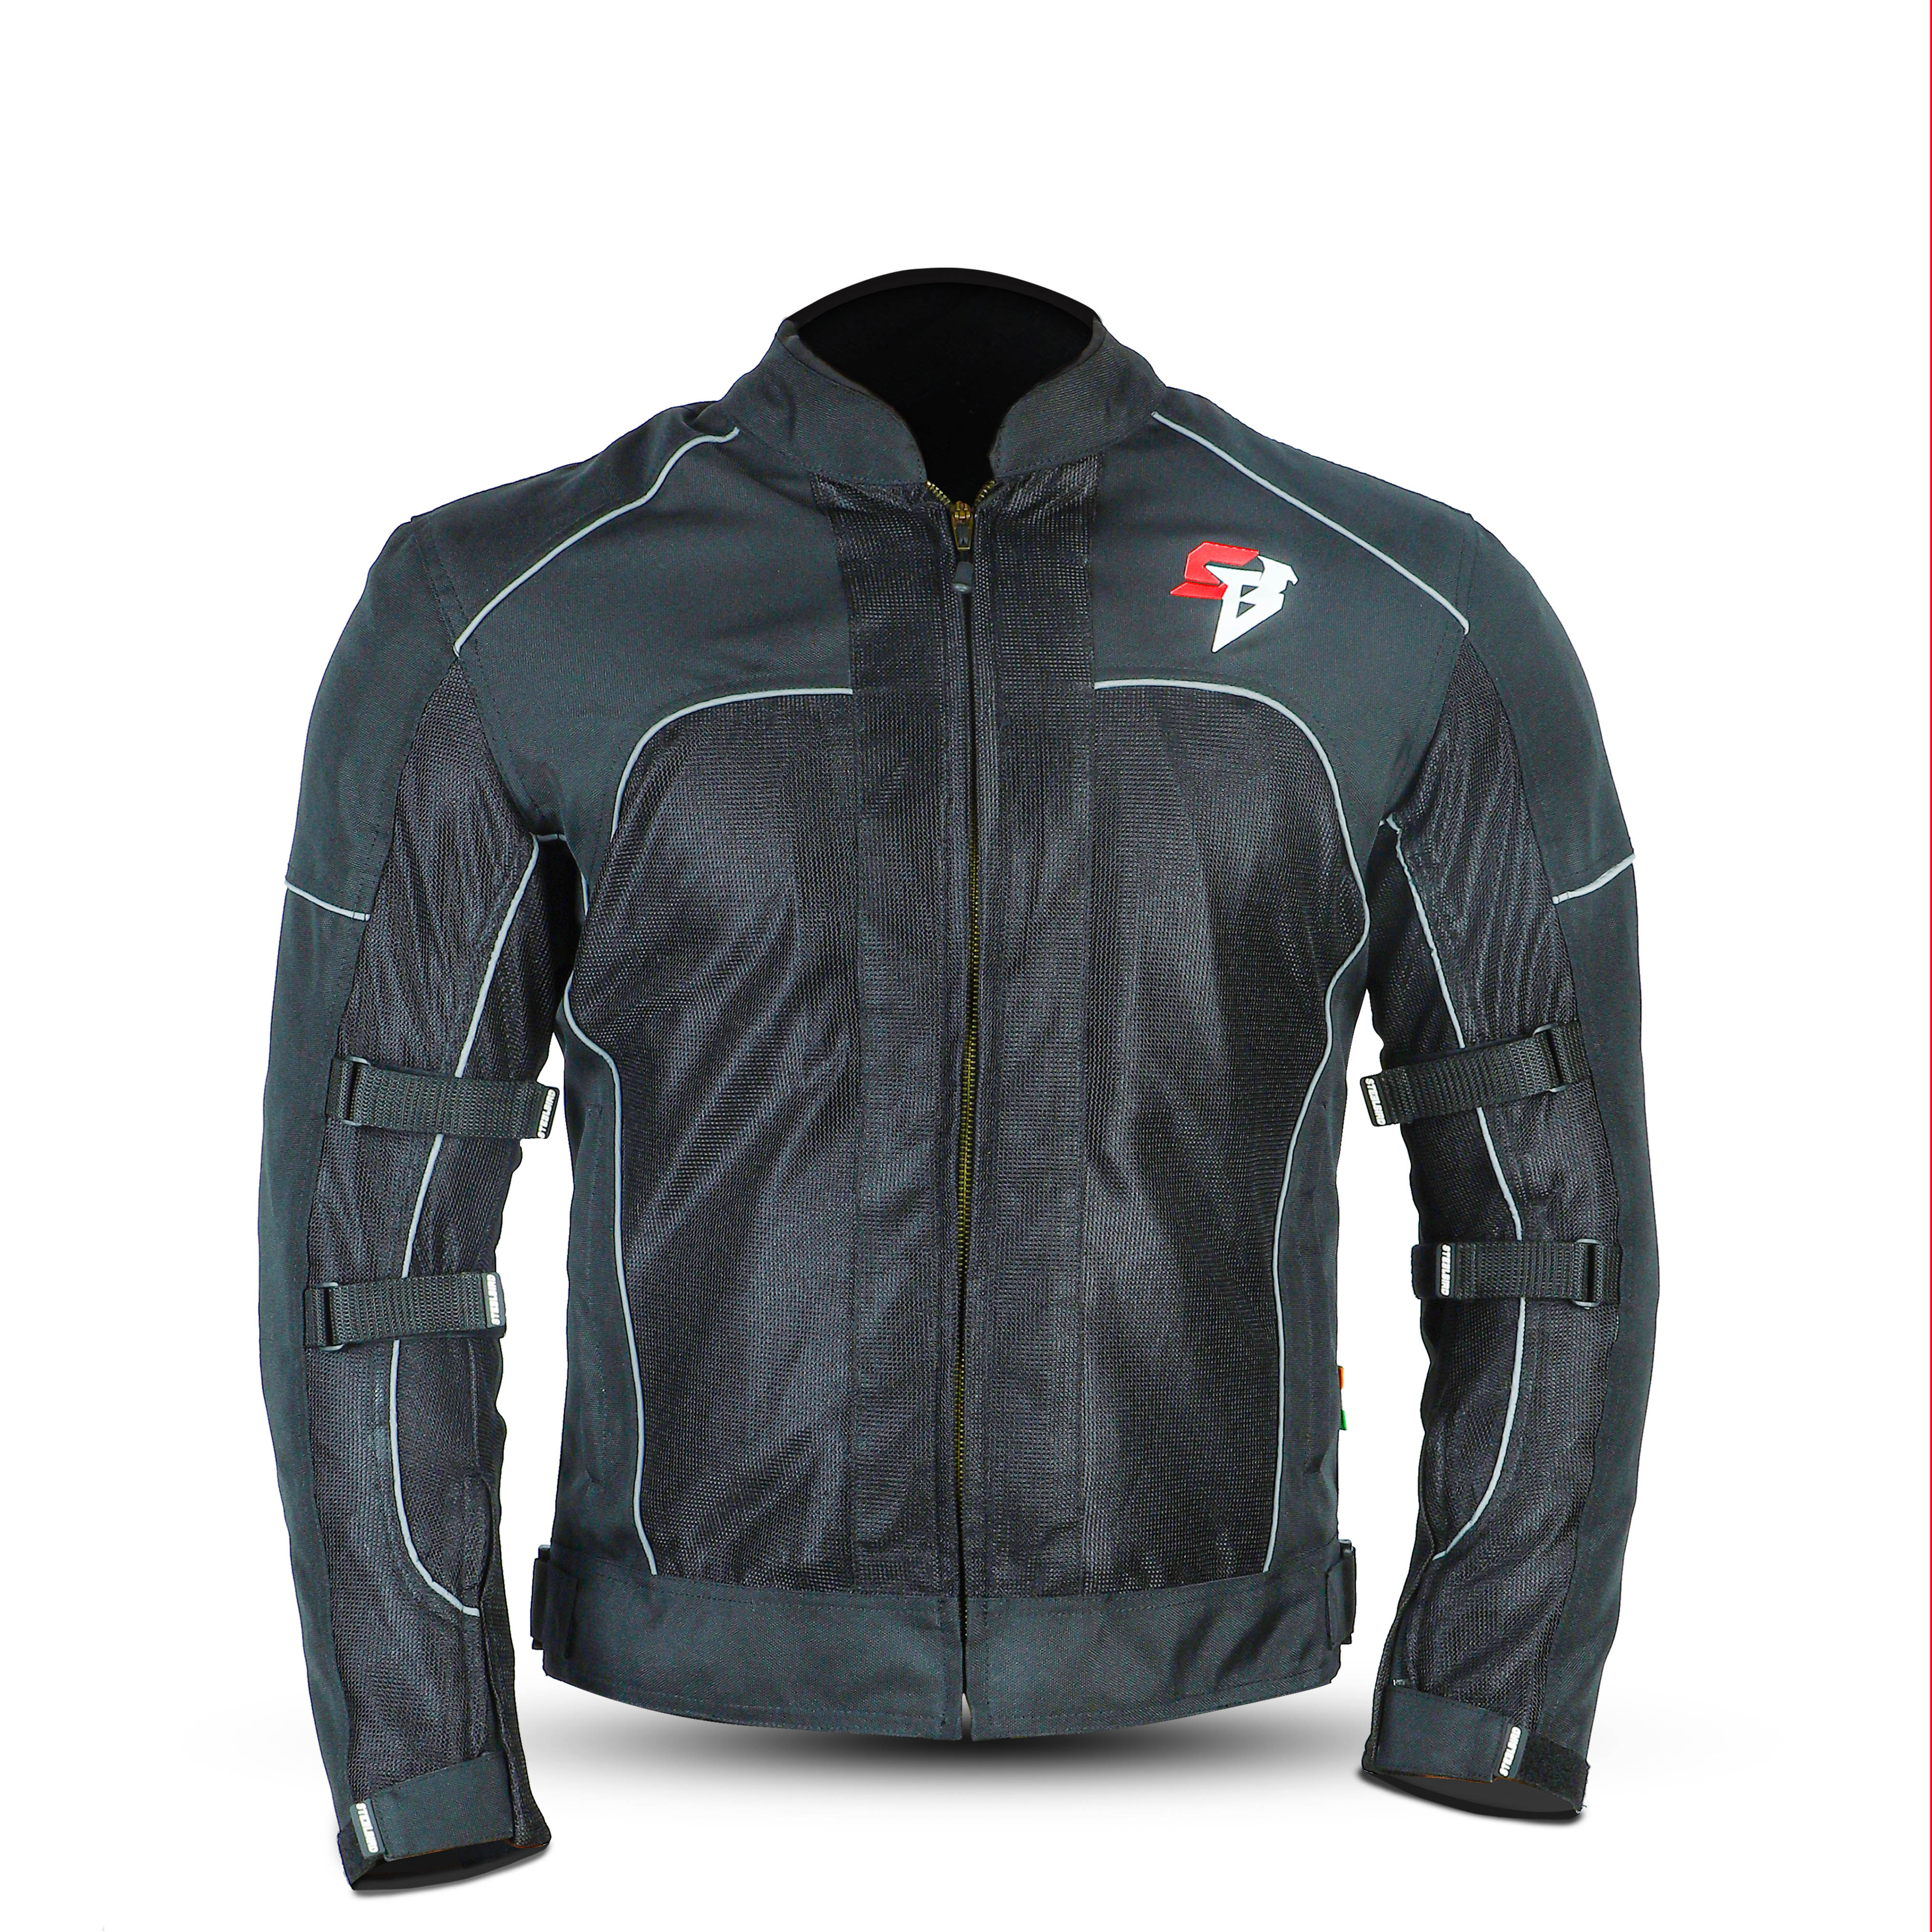 Steelbird Zojila Z1 Riding Jacket with Impact Protection and Abrasion Resistance